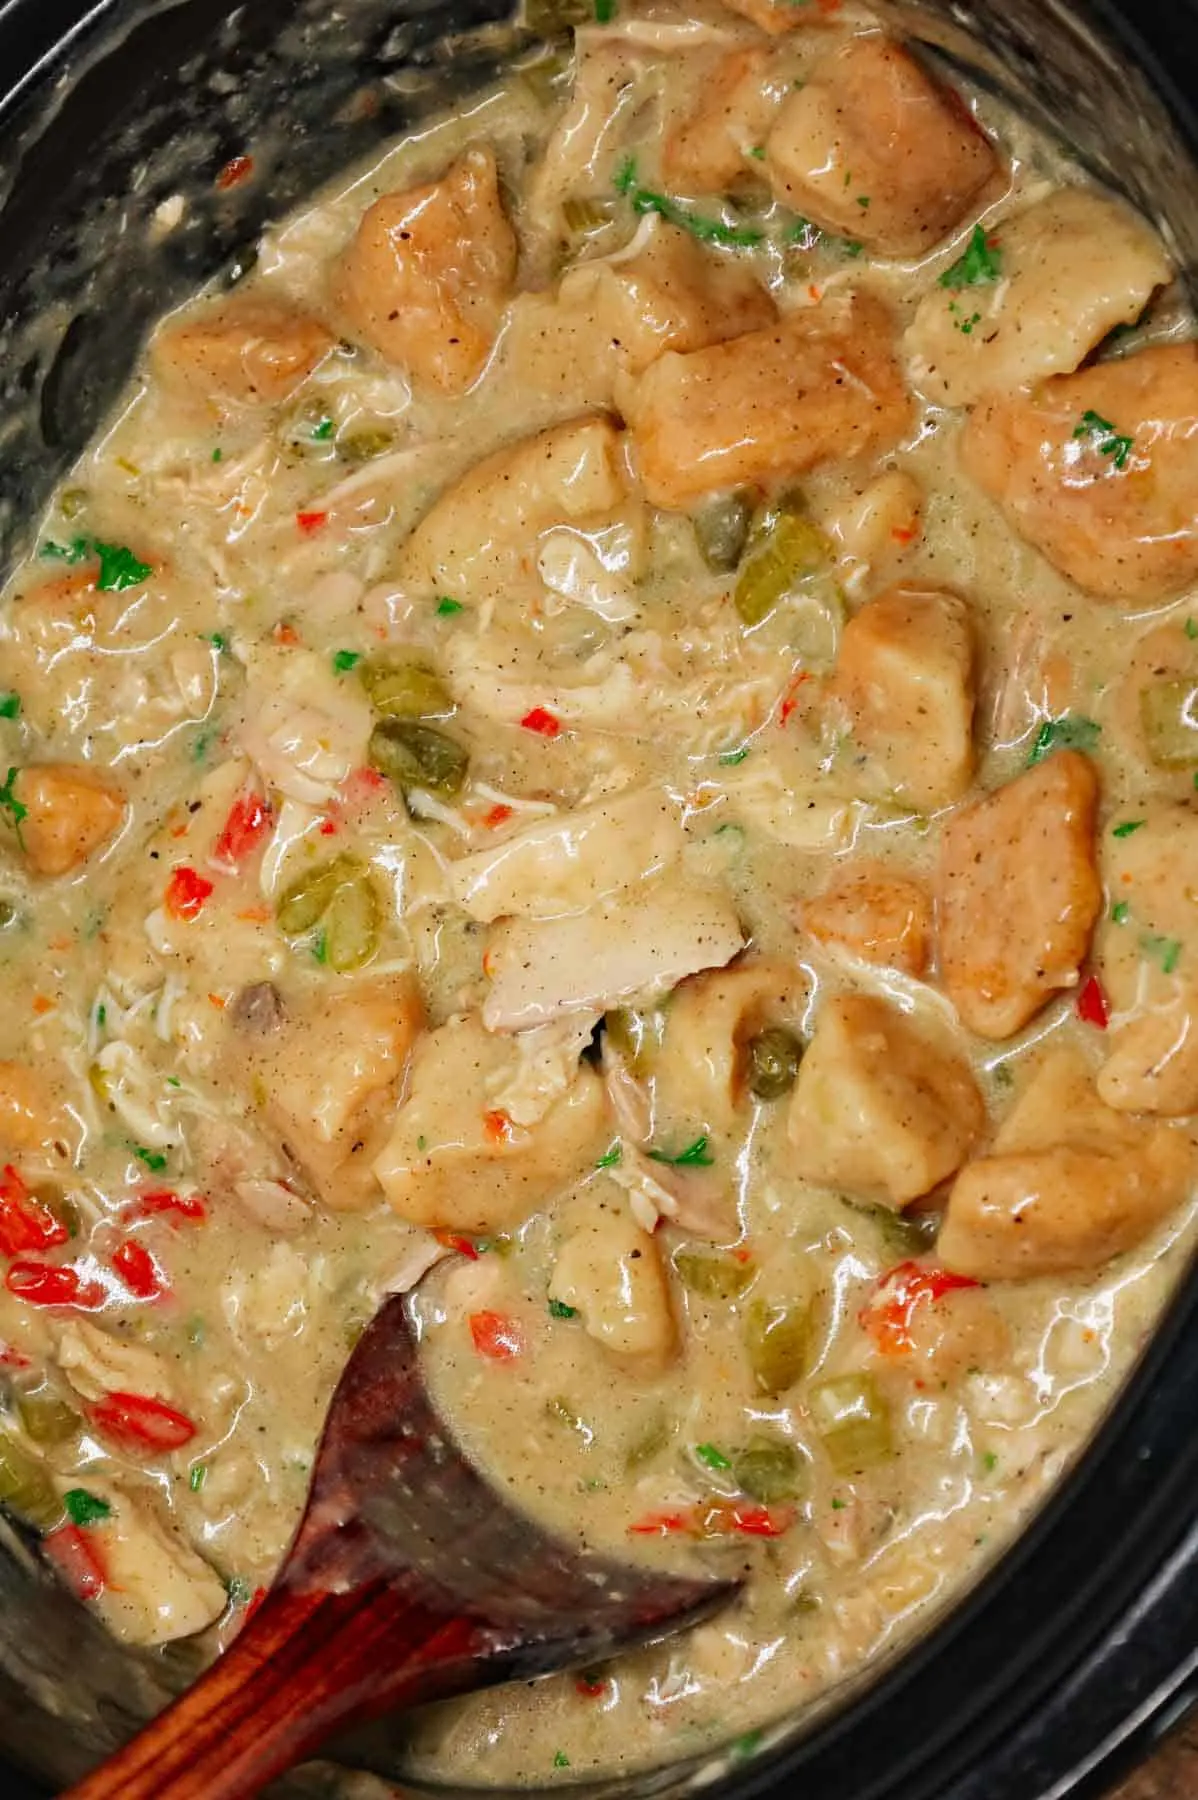 Crock Pot Chicken and Biscuits is a delicious comfort food dish made with boneless skinless chicken thighs, diced onions, celery, red and green bell peppers, cream of mushroom soup, cream of chicken soup, poultry seasoning and Pillsbury refrigerated biscuits.